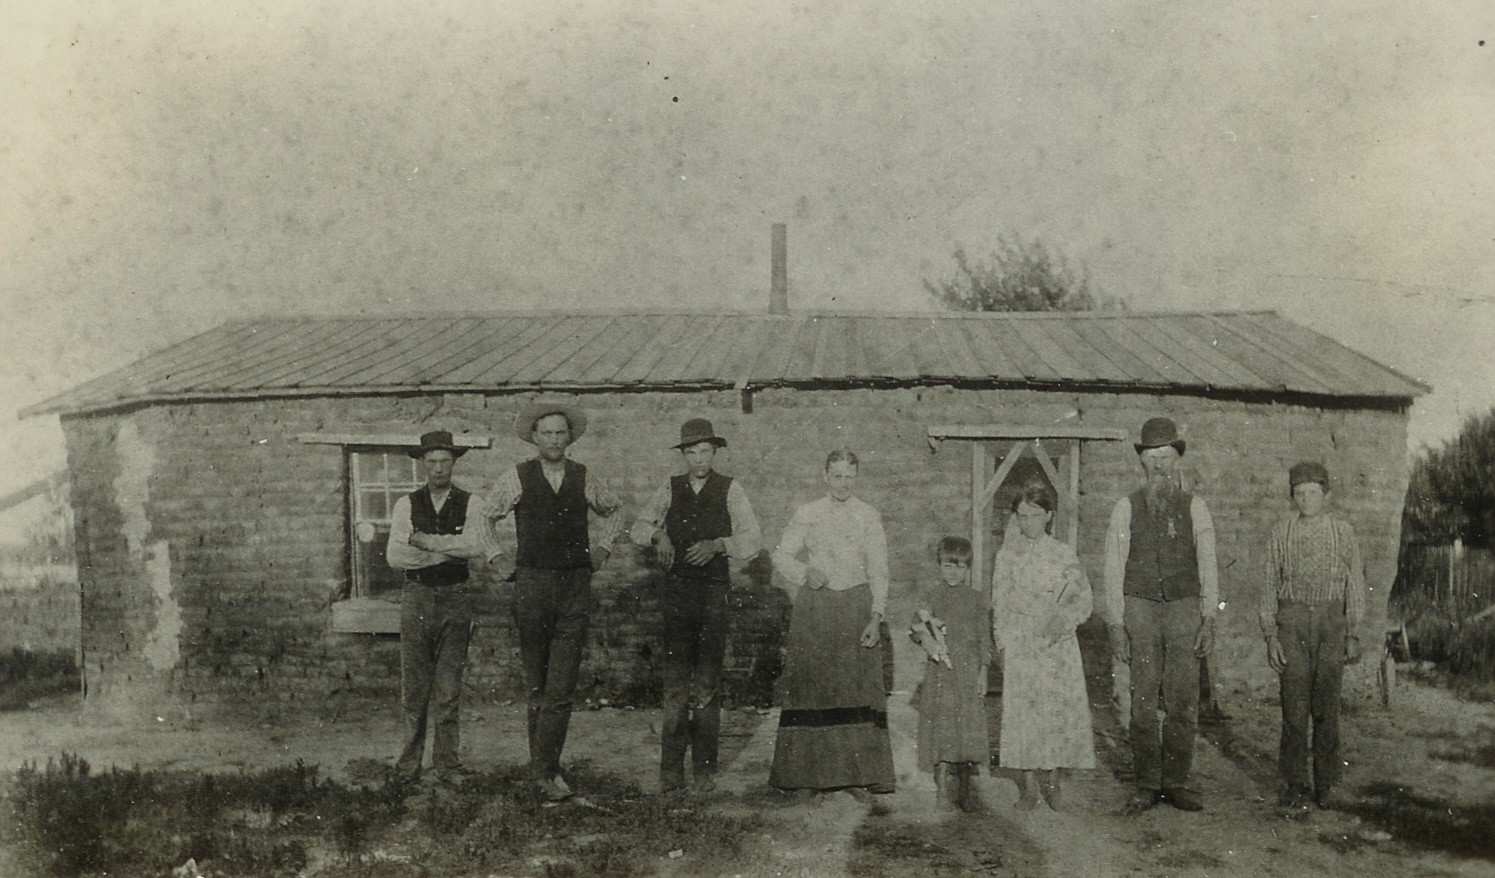 Sod house and family, 1874. Courtesy of Adams County Historical Society.